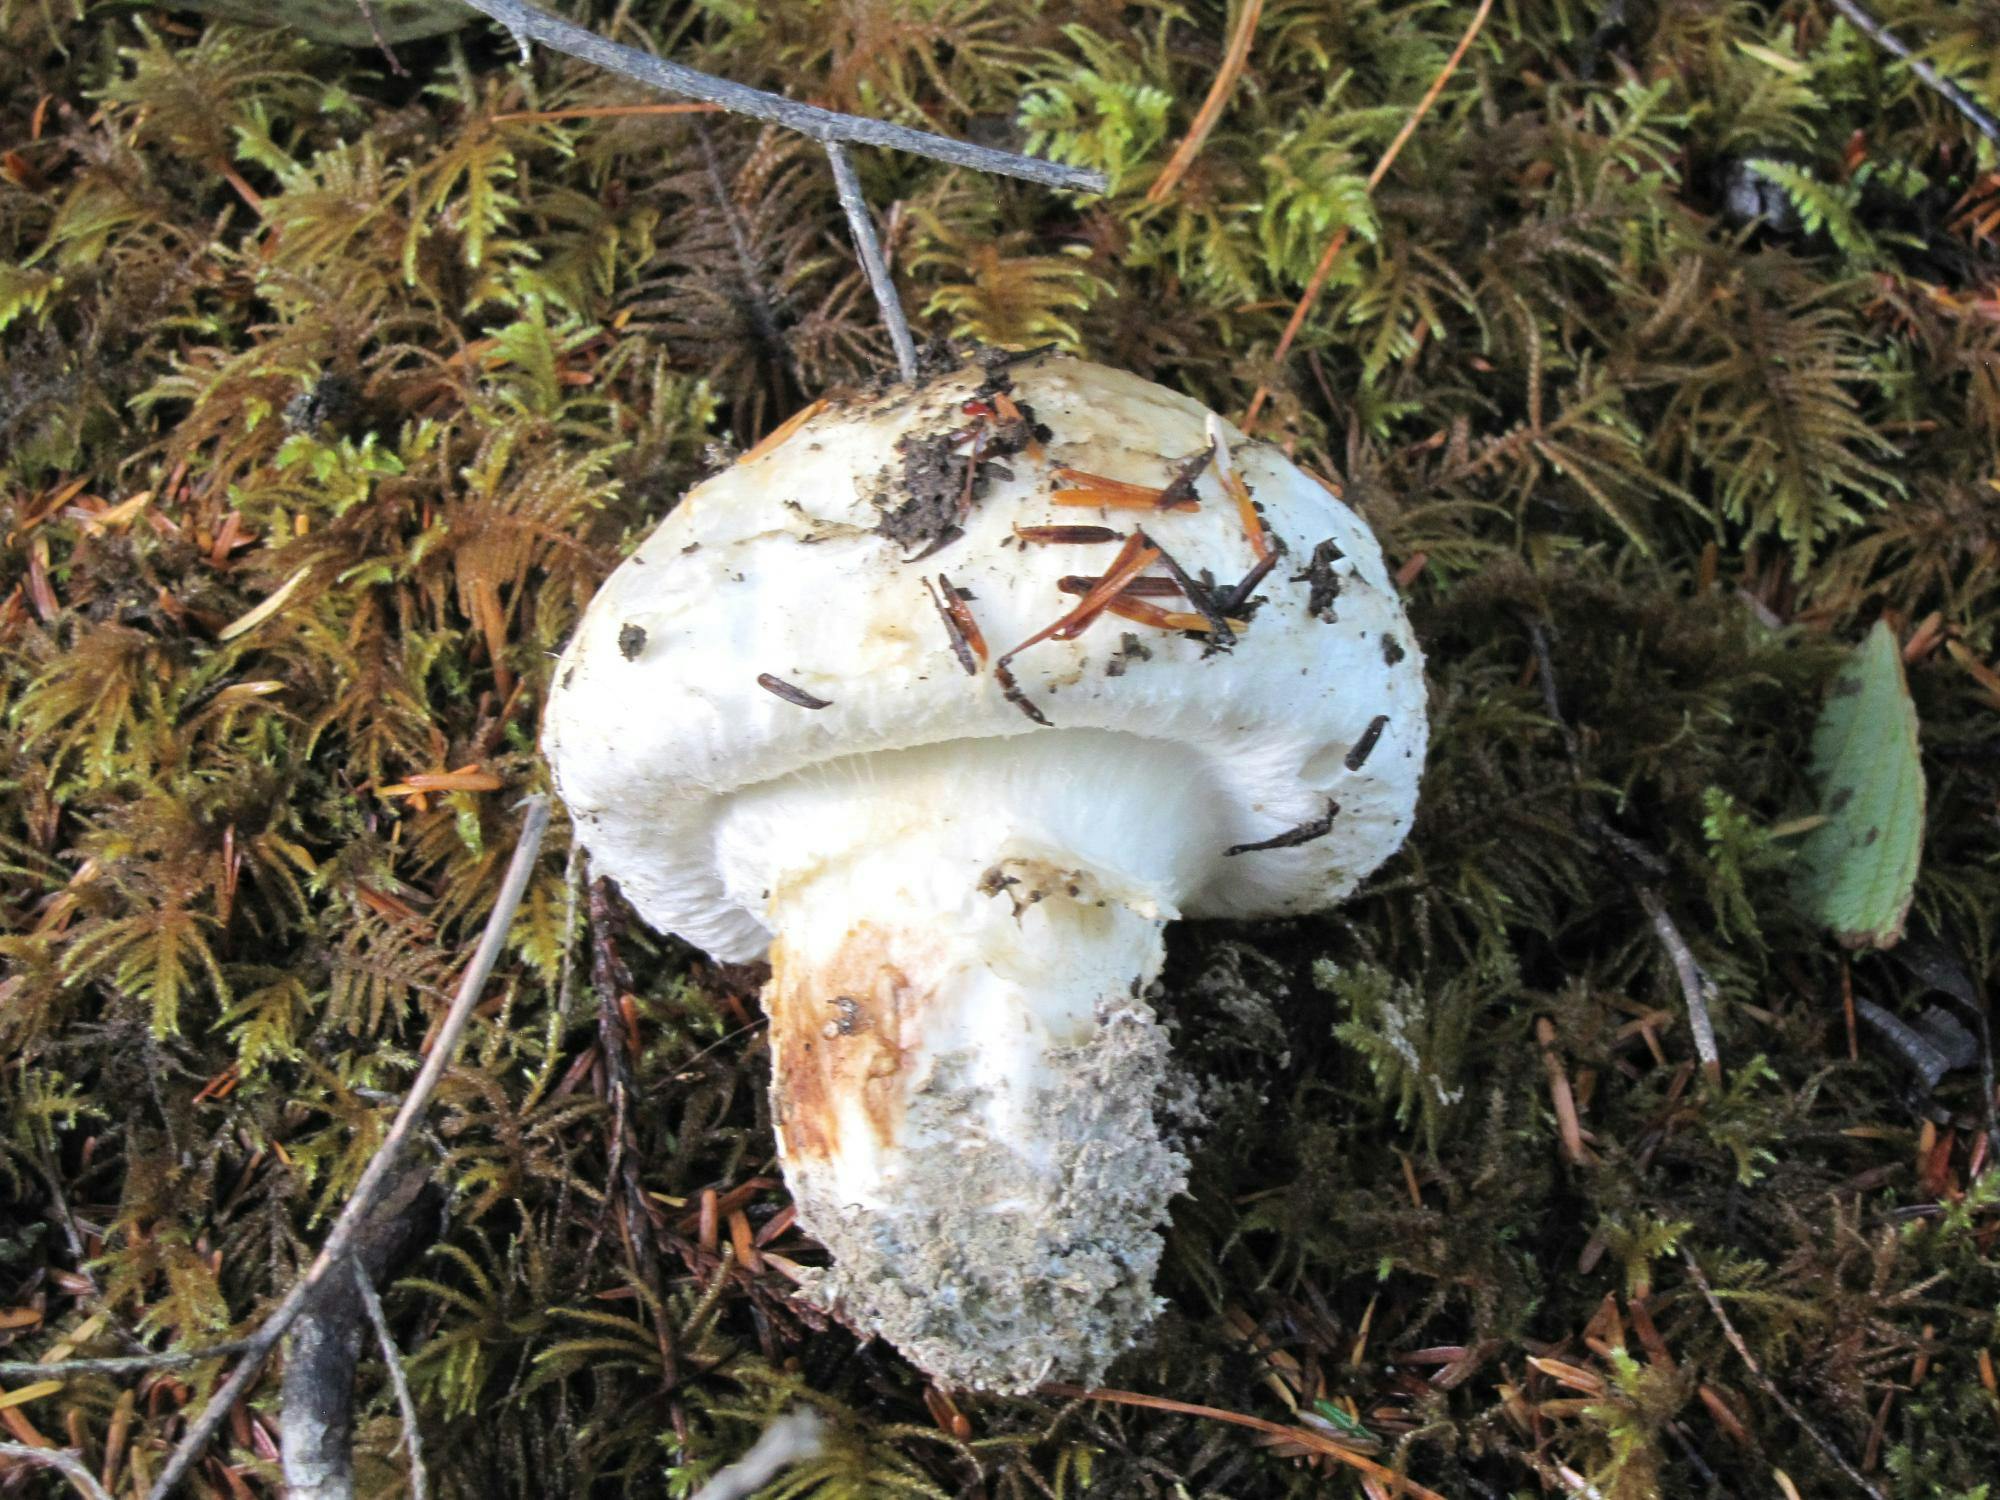 Discovering the Delicacy: What is Matsutake Mushroom and Why is it So Special?